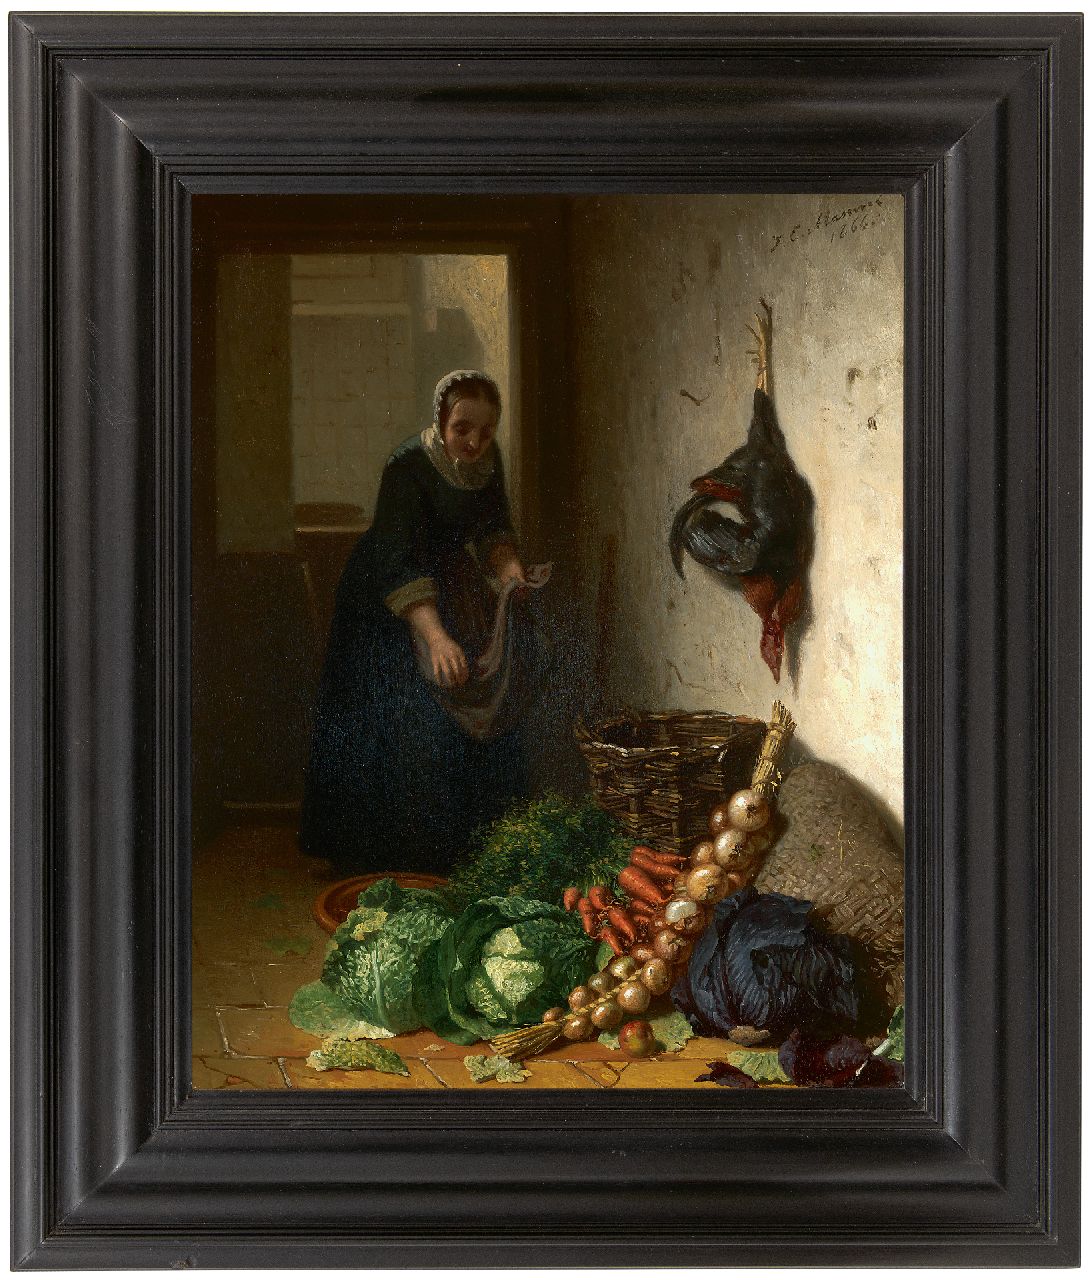 Masurel J.E.  | Johannes Engel Masurel | Paintings offered for sale | In the kitchen, oil on panel 31.2 x 25.3 cm, signed u.r. and dated 1866